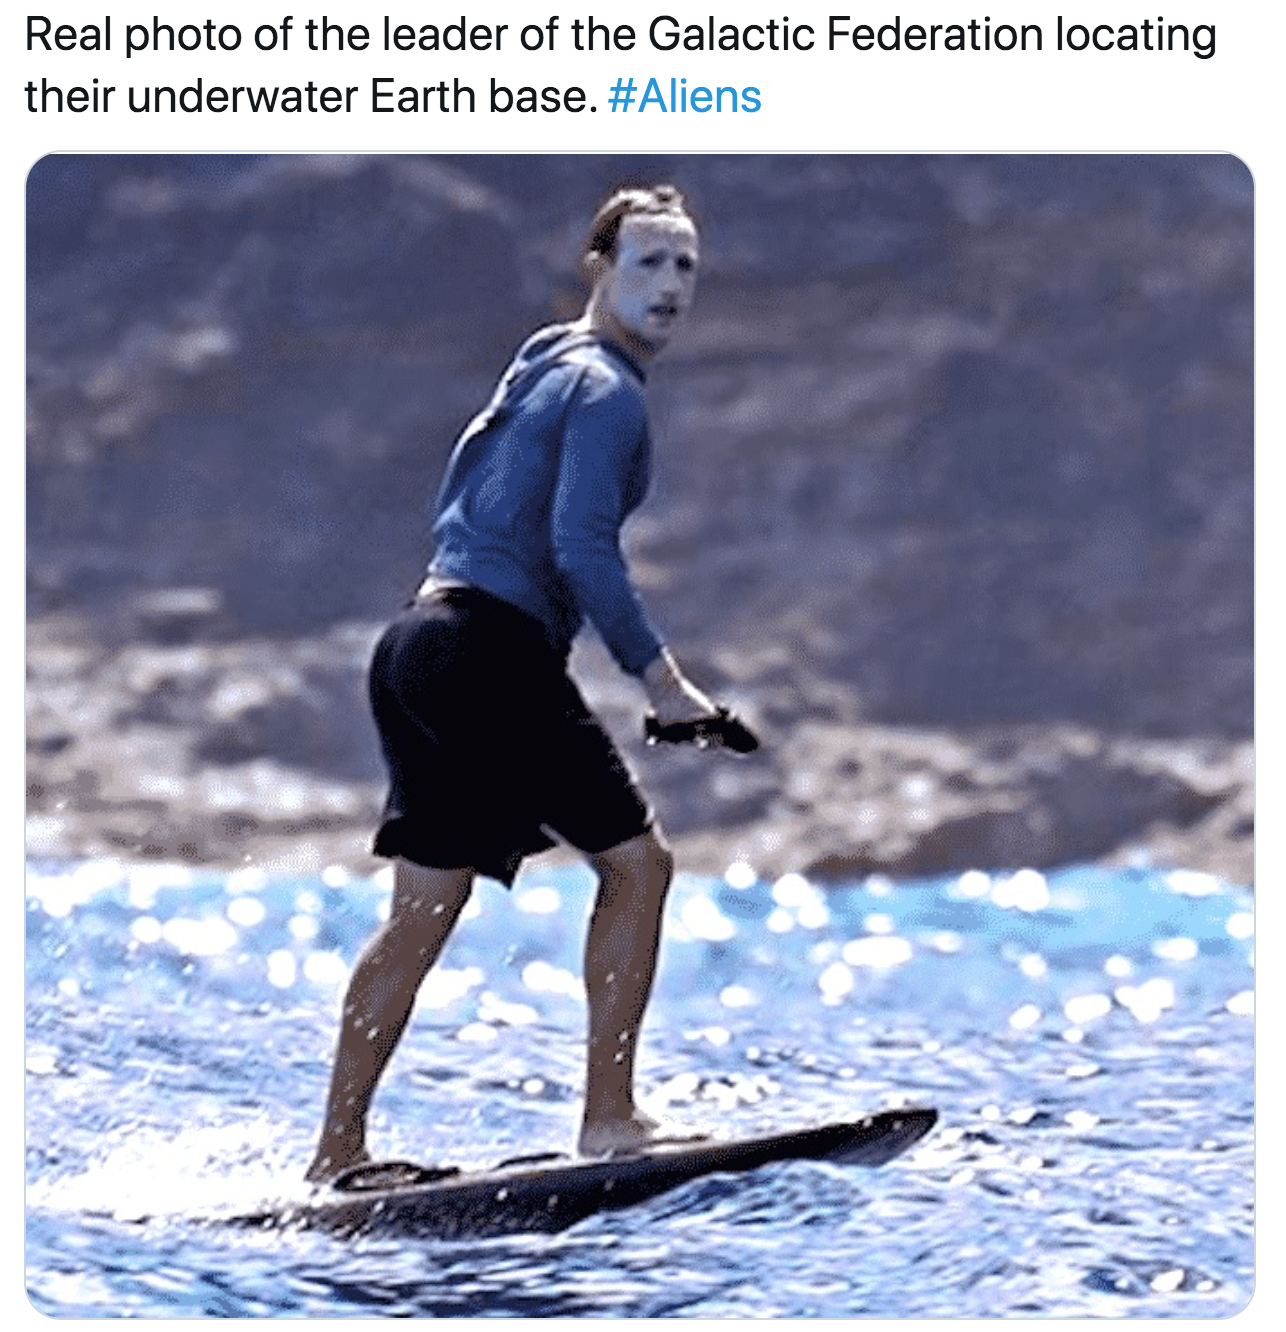 mark zuckerberg sunscreen - Real photo of the leader of the Galactic Federation locating their underwater Earth base.